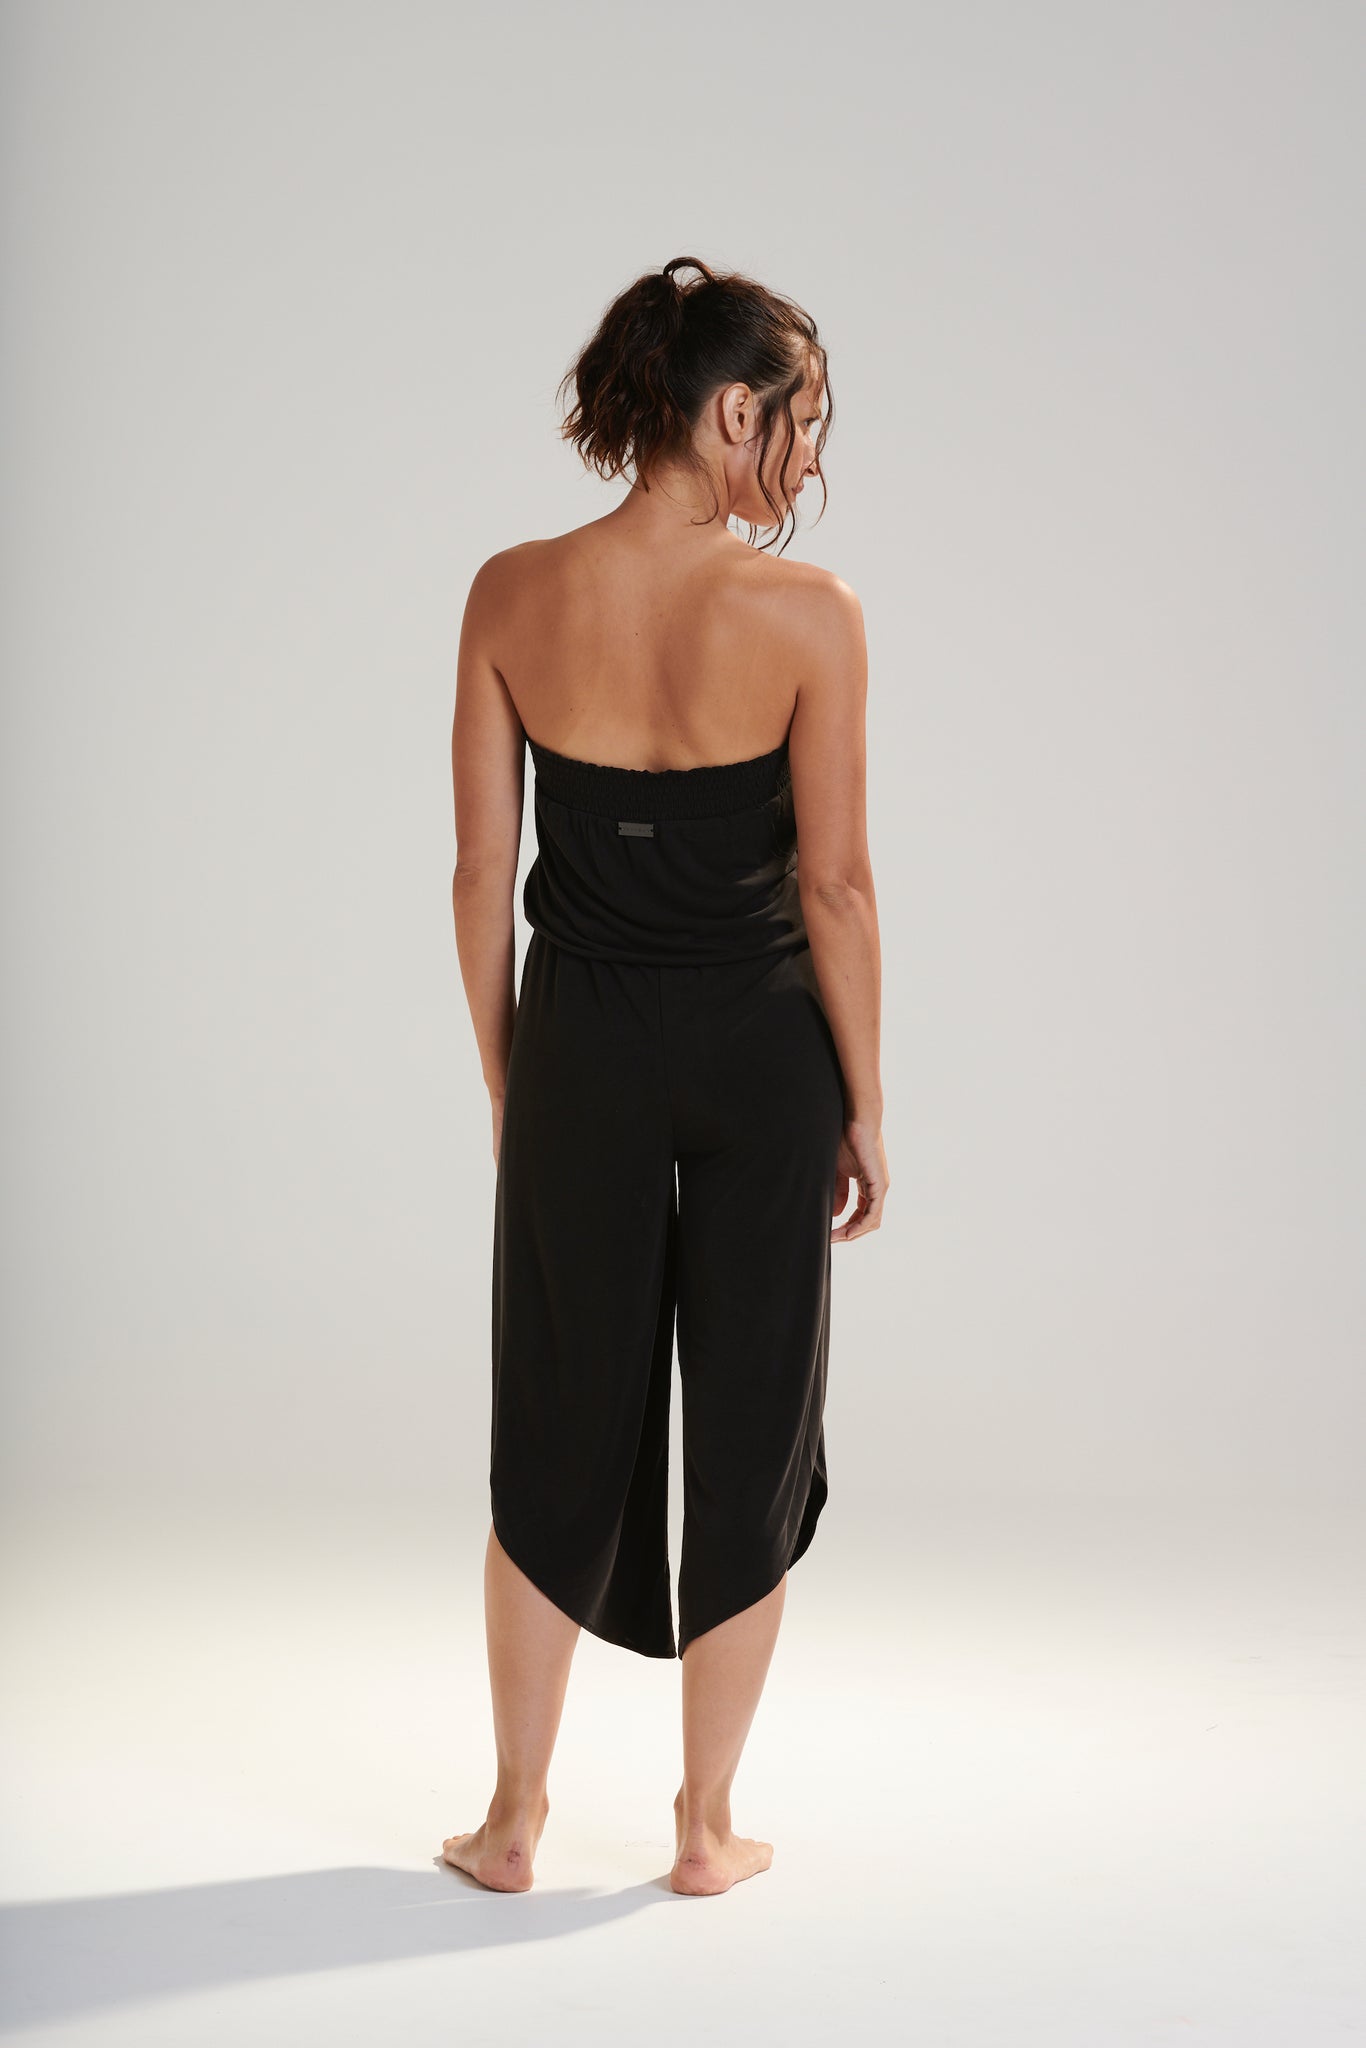 FREYA JUMPSUIT BEECHWOOD MODAL JERSEY SHIRRED BODICE AND PETAL WRAP LEG WITH ELASTIC WAIST AND REMOVABLE TIE IN DARK WASHED BLACK BACK VIEW